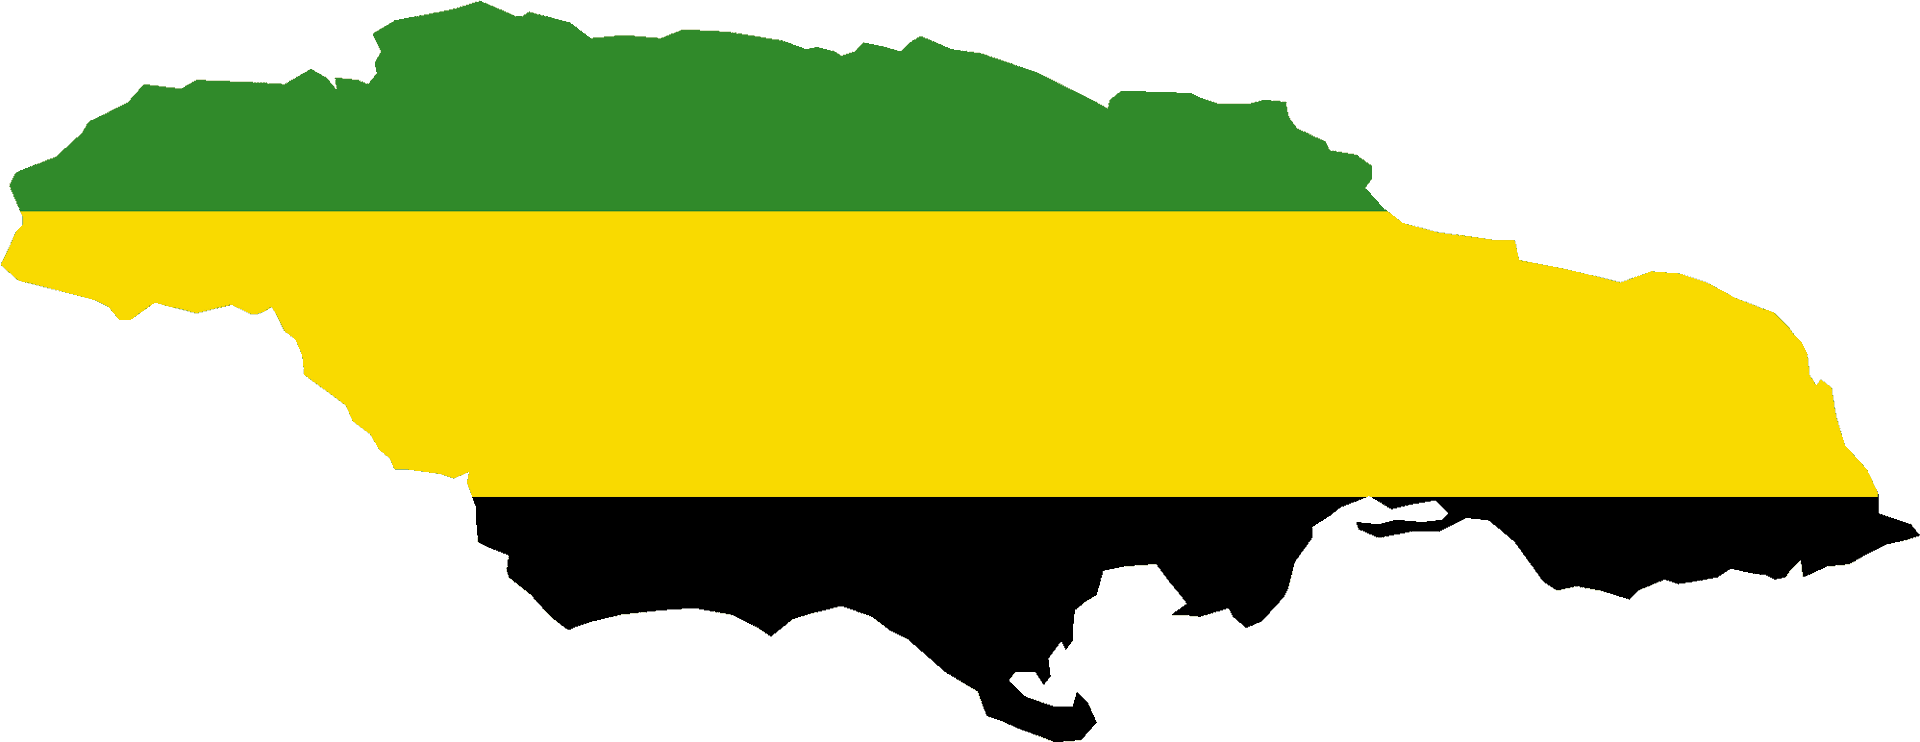 Jamaica Map Silhouette Green Yellow Black PNG